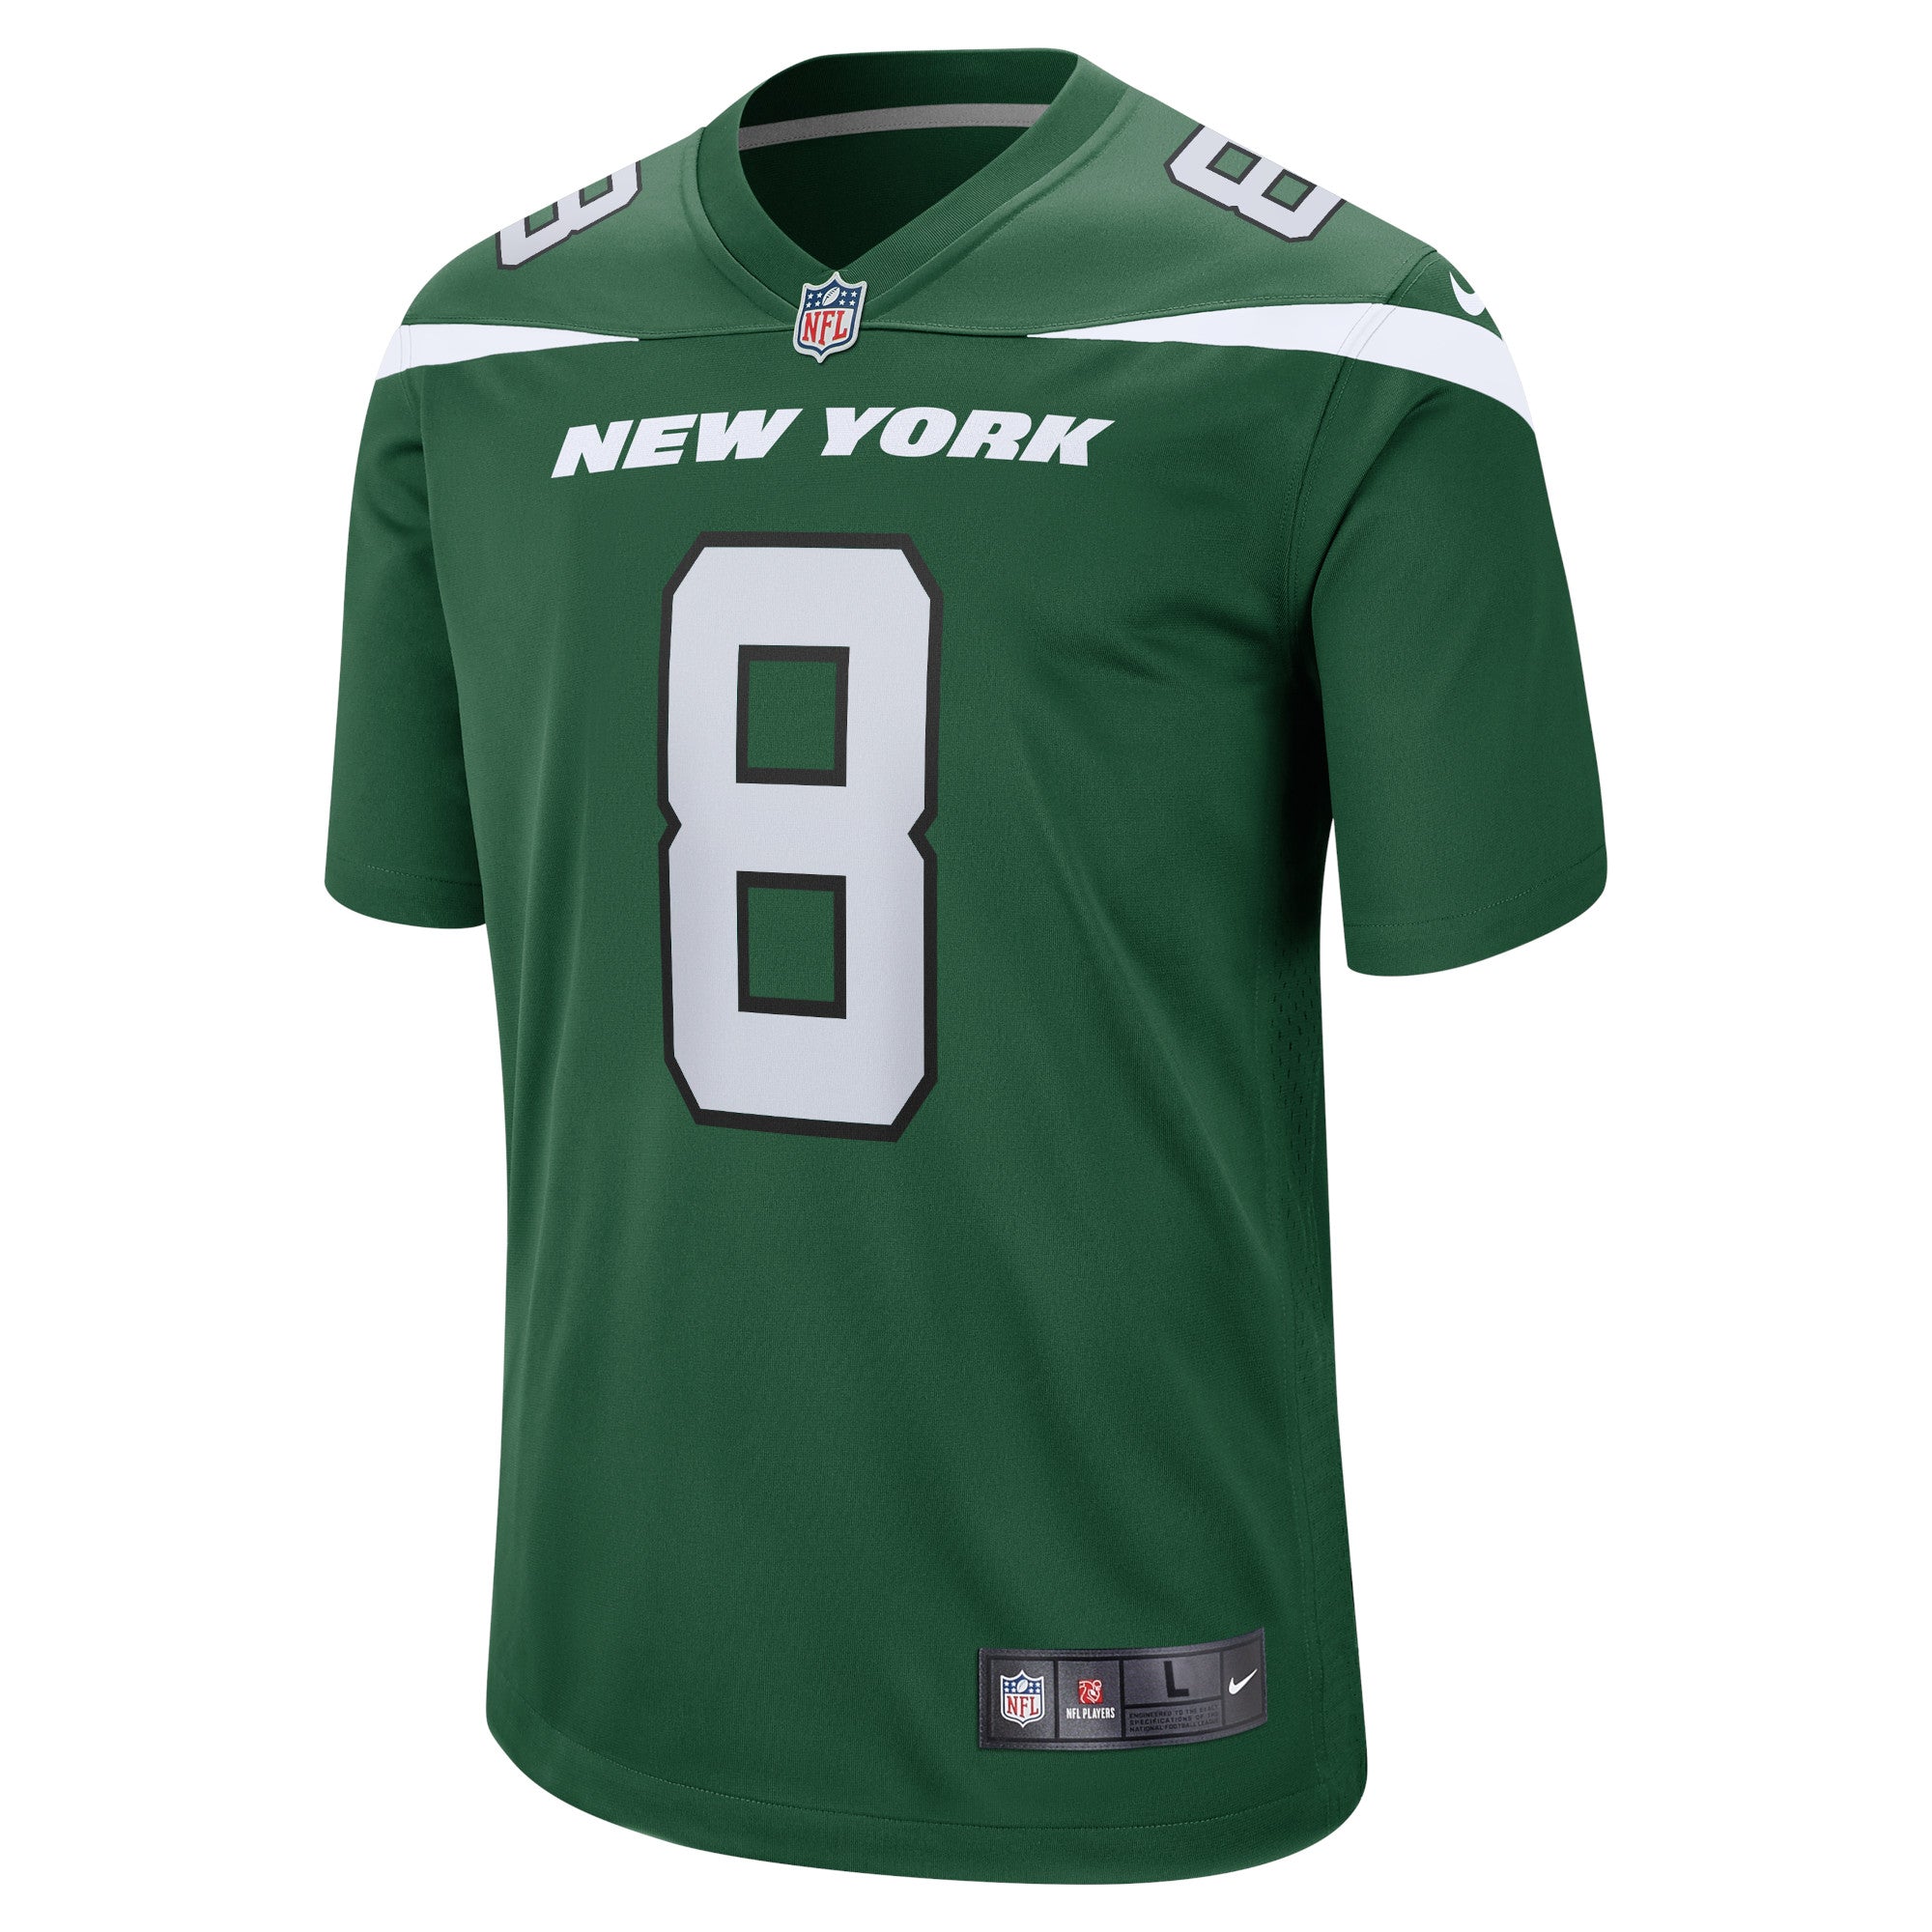 Aaron Rodgers New York Jets Nike NFL Game Jersey - Green